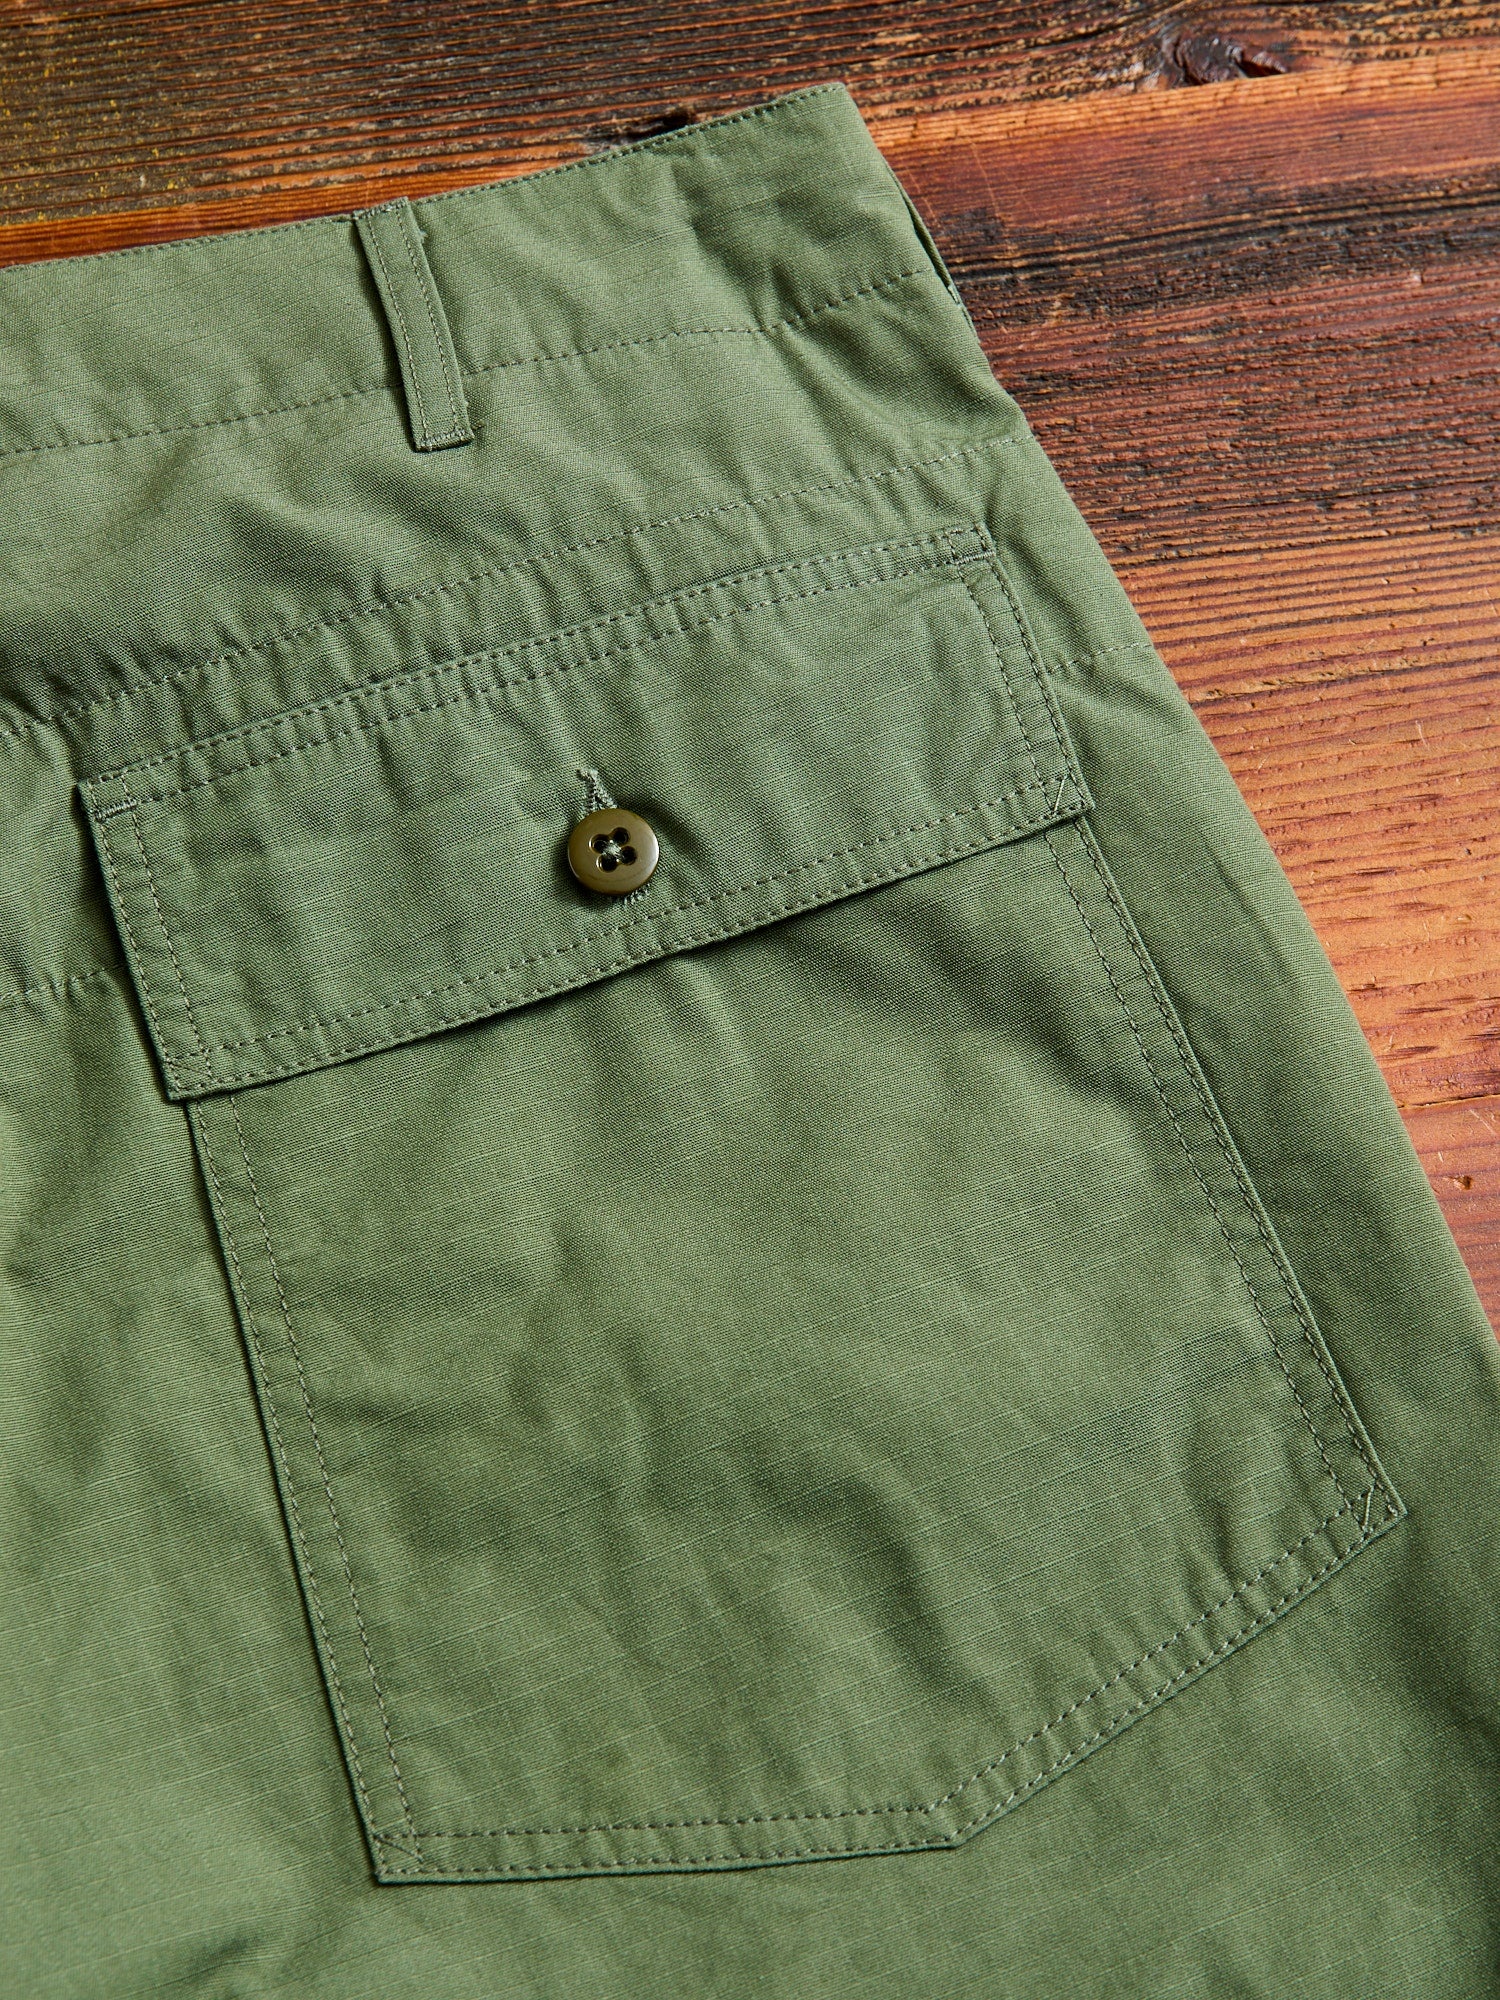 Fatigue Shorts in Olive Cotton Ripstop - 8